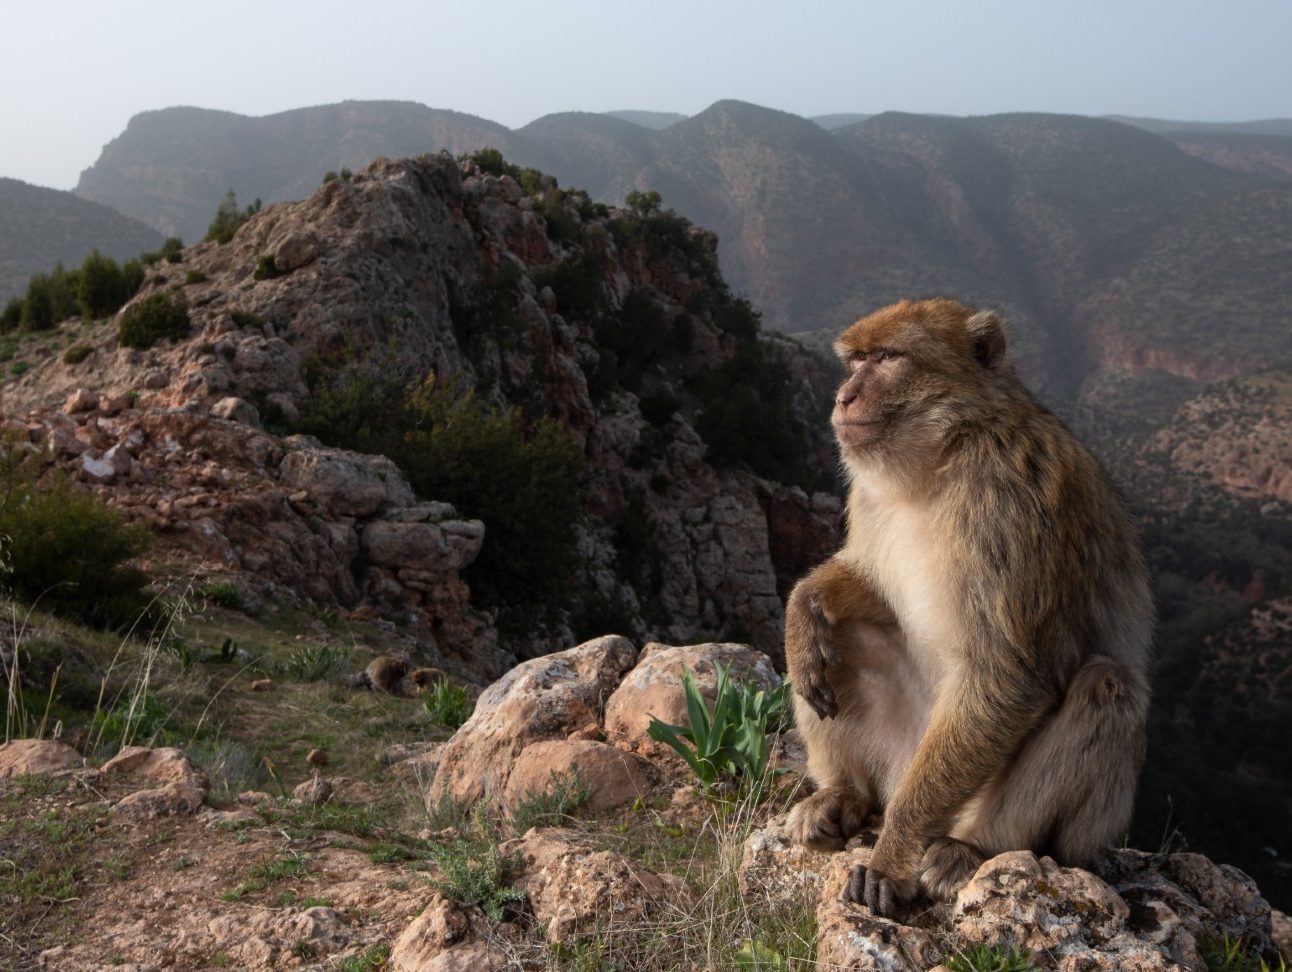 A macaque sat on a hilltop in Morocco